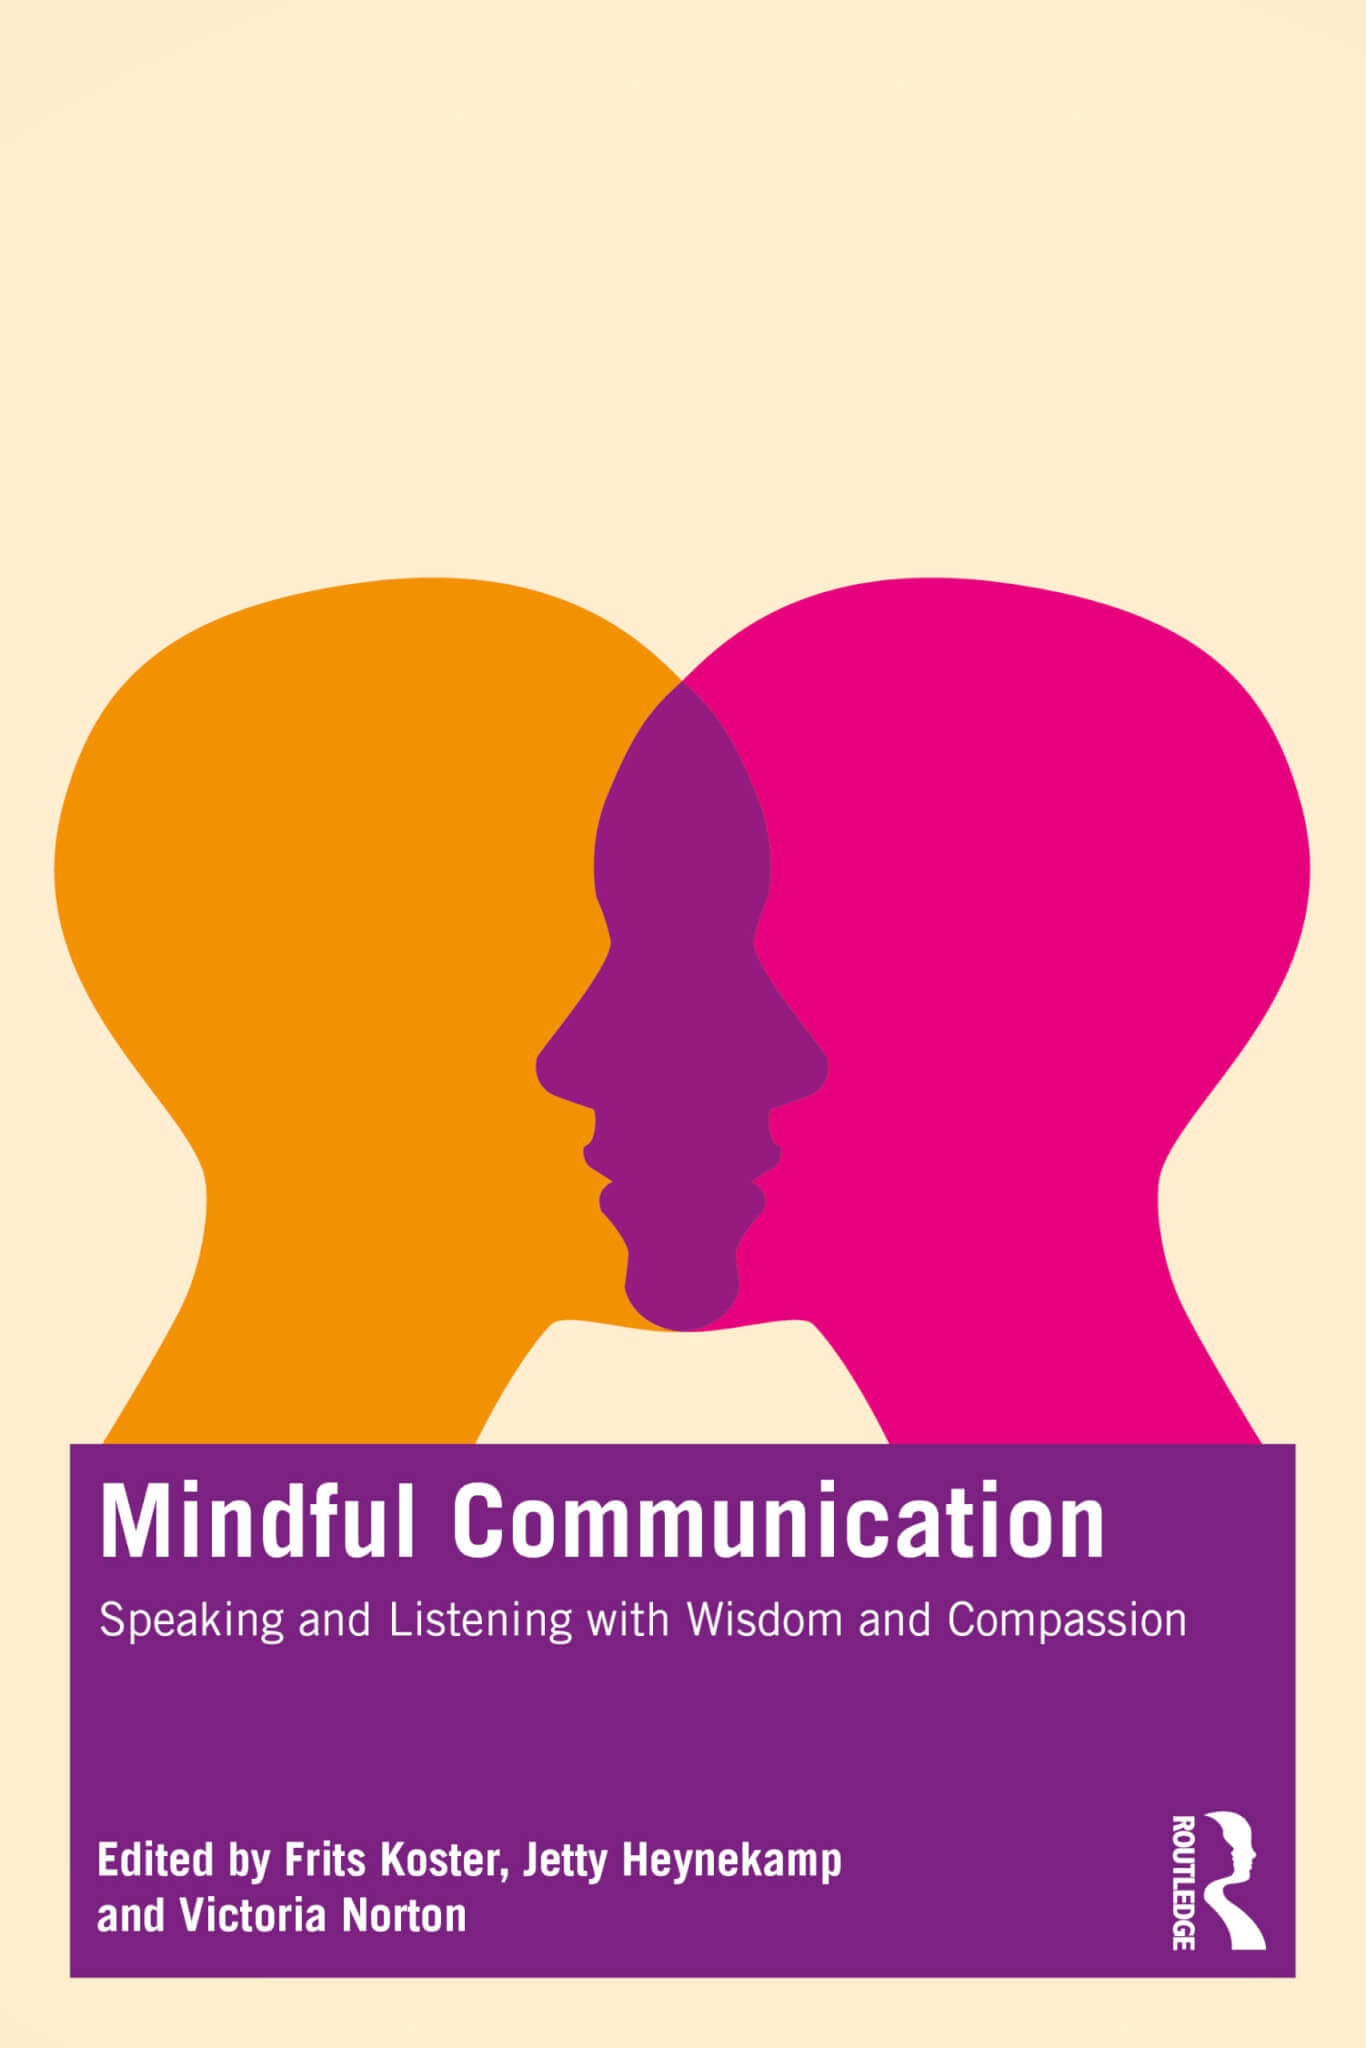 Mindful Communication – Speaking and Listening with Wisdom and Compassion